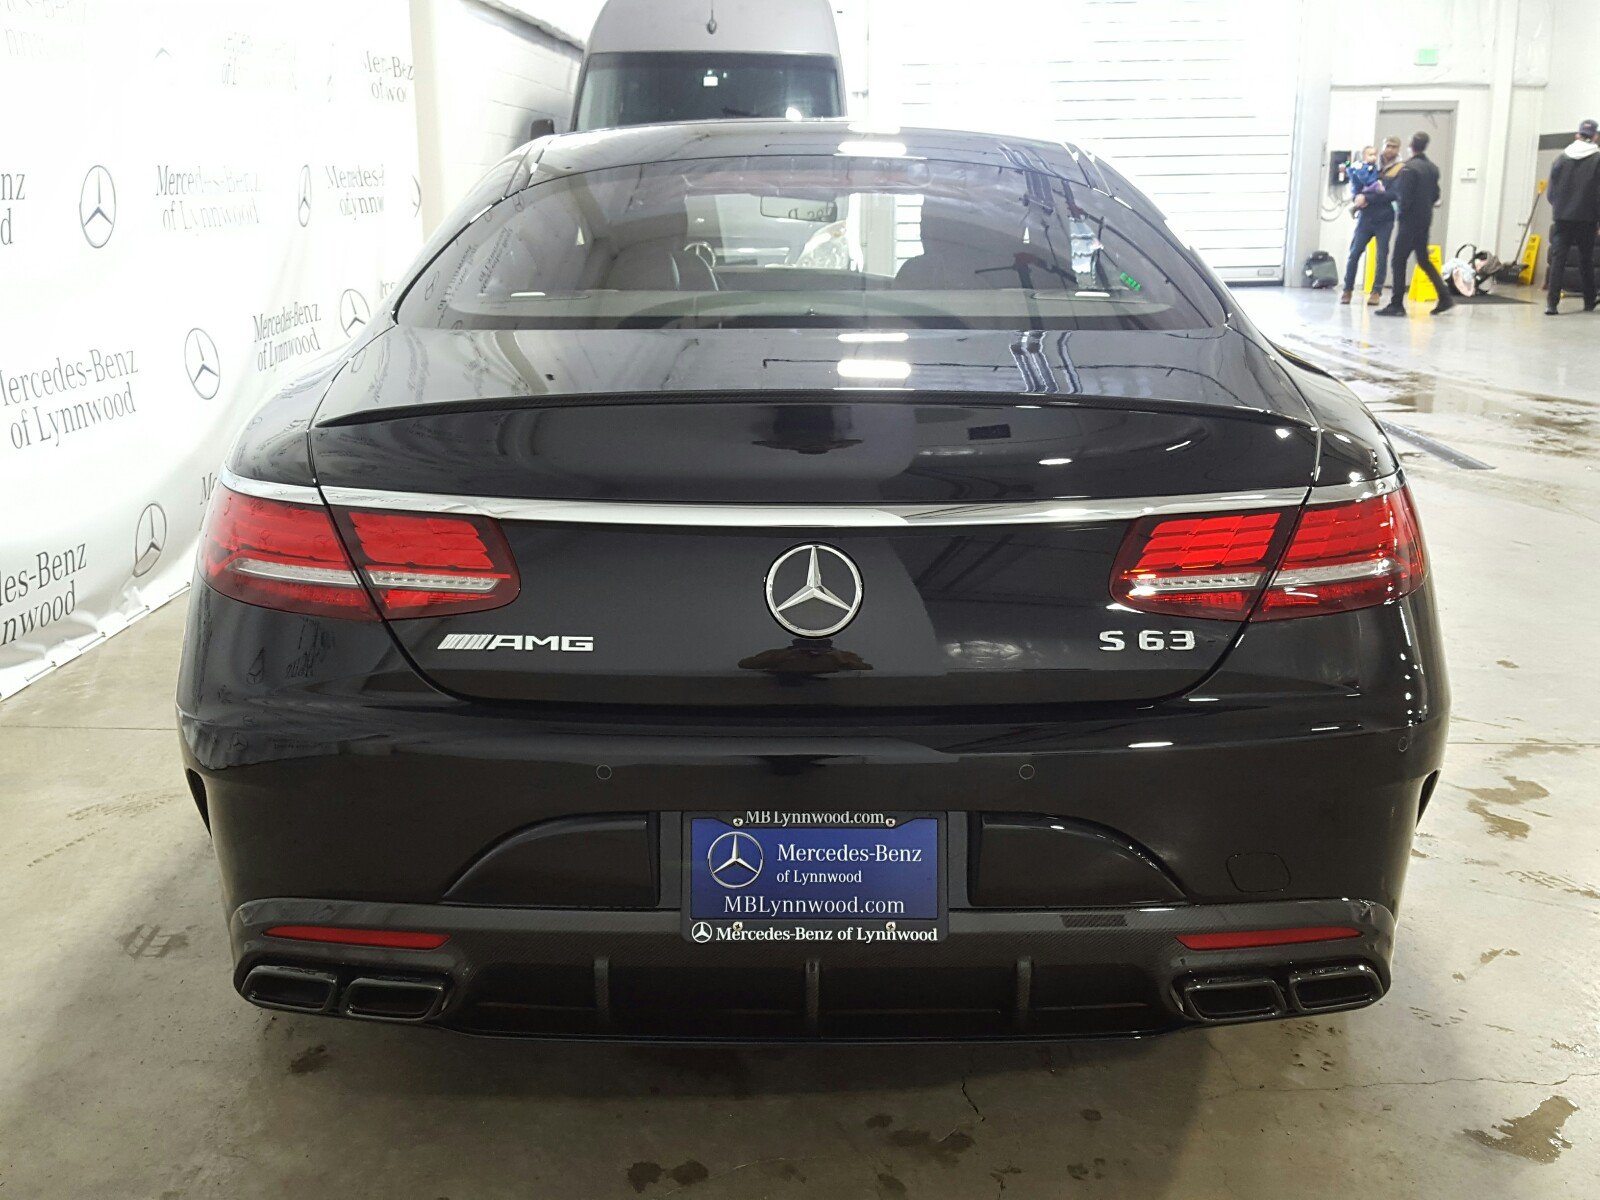 New 2020 Mercedes-Benz S-Class AMG® S 63 4MATIC® Coupe Coupe in Lynnwood #202454 | Mercedes-Benz ...